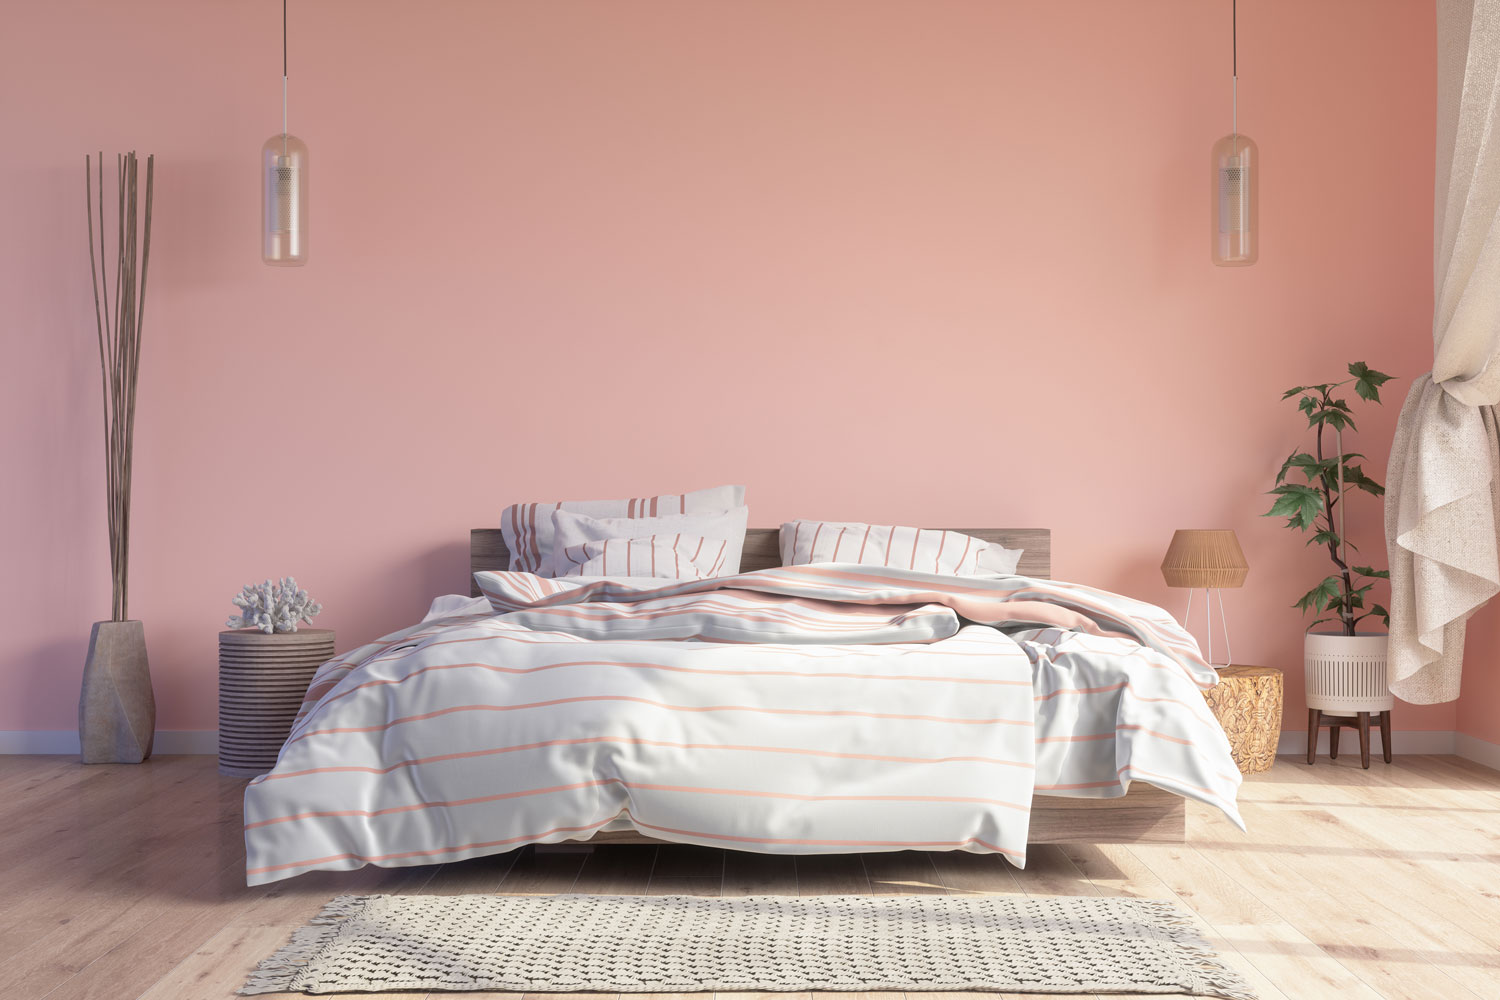 A standard king sized bed inside a pink colored bed